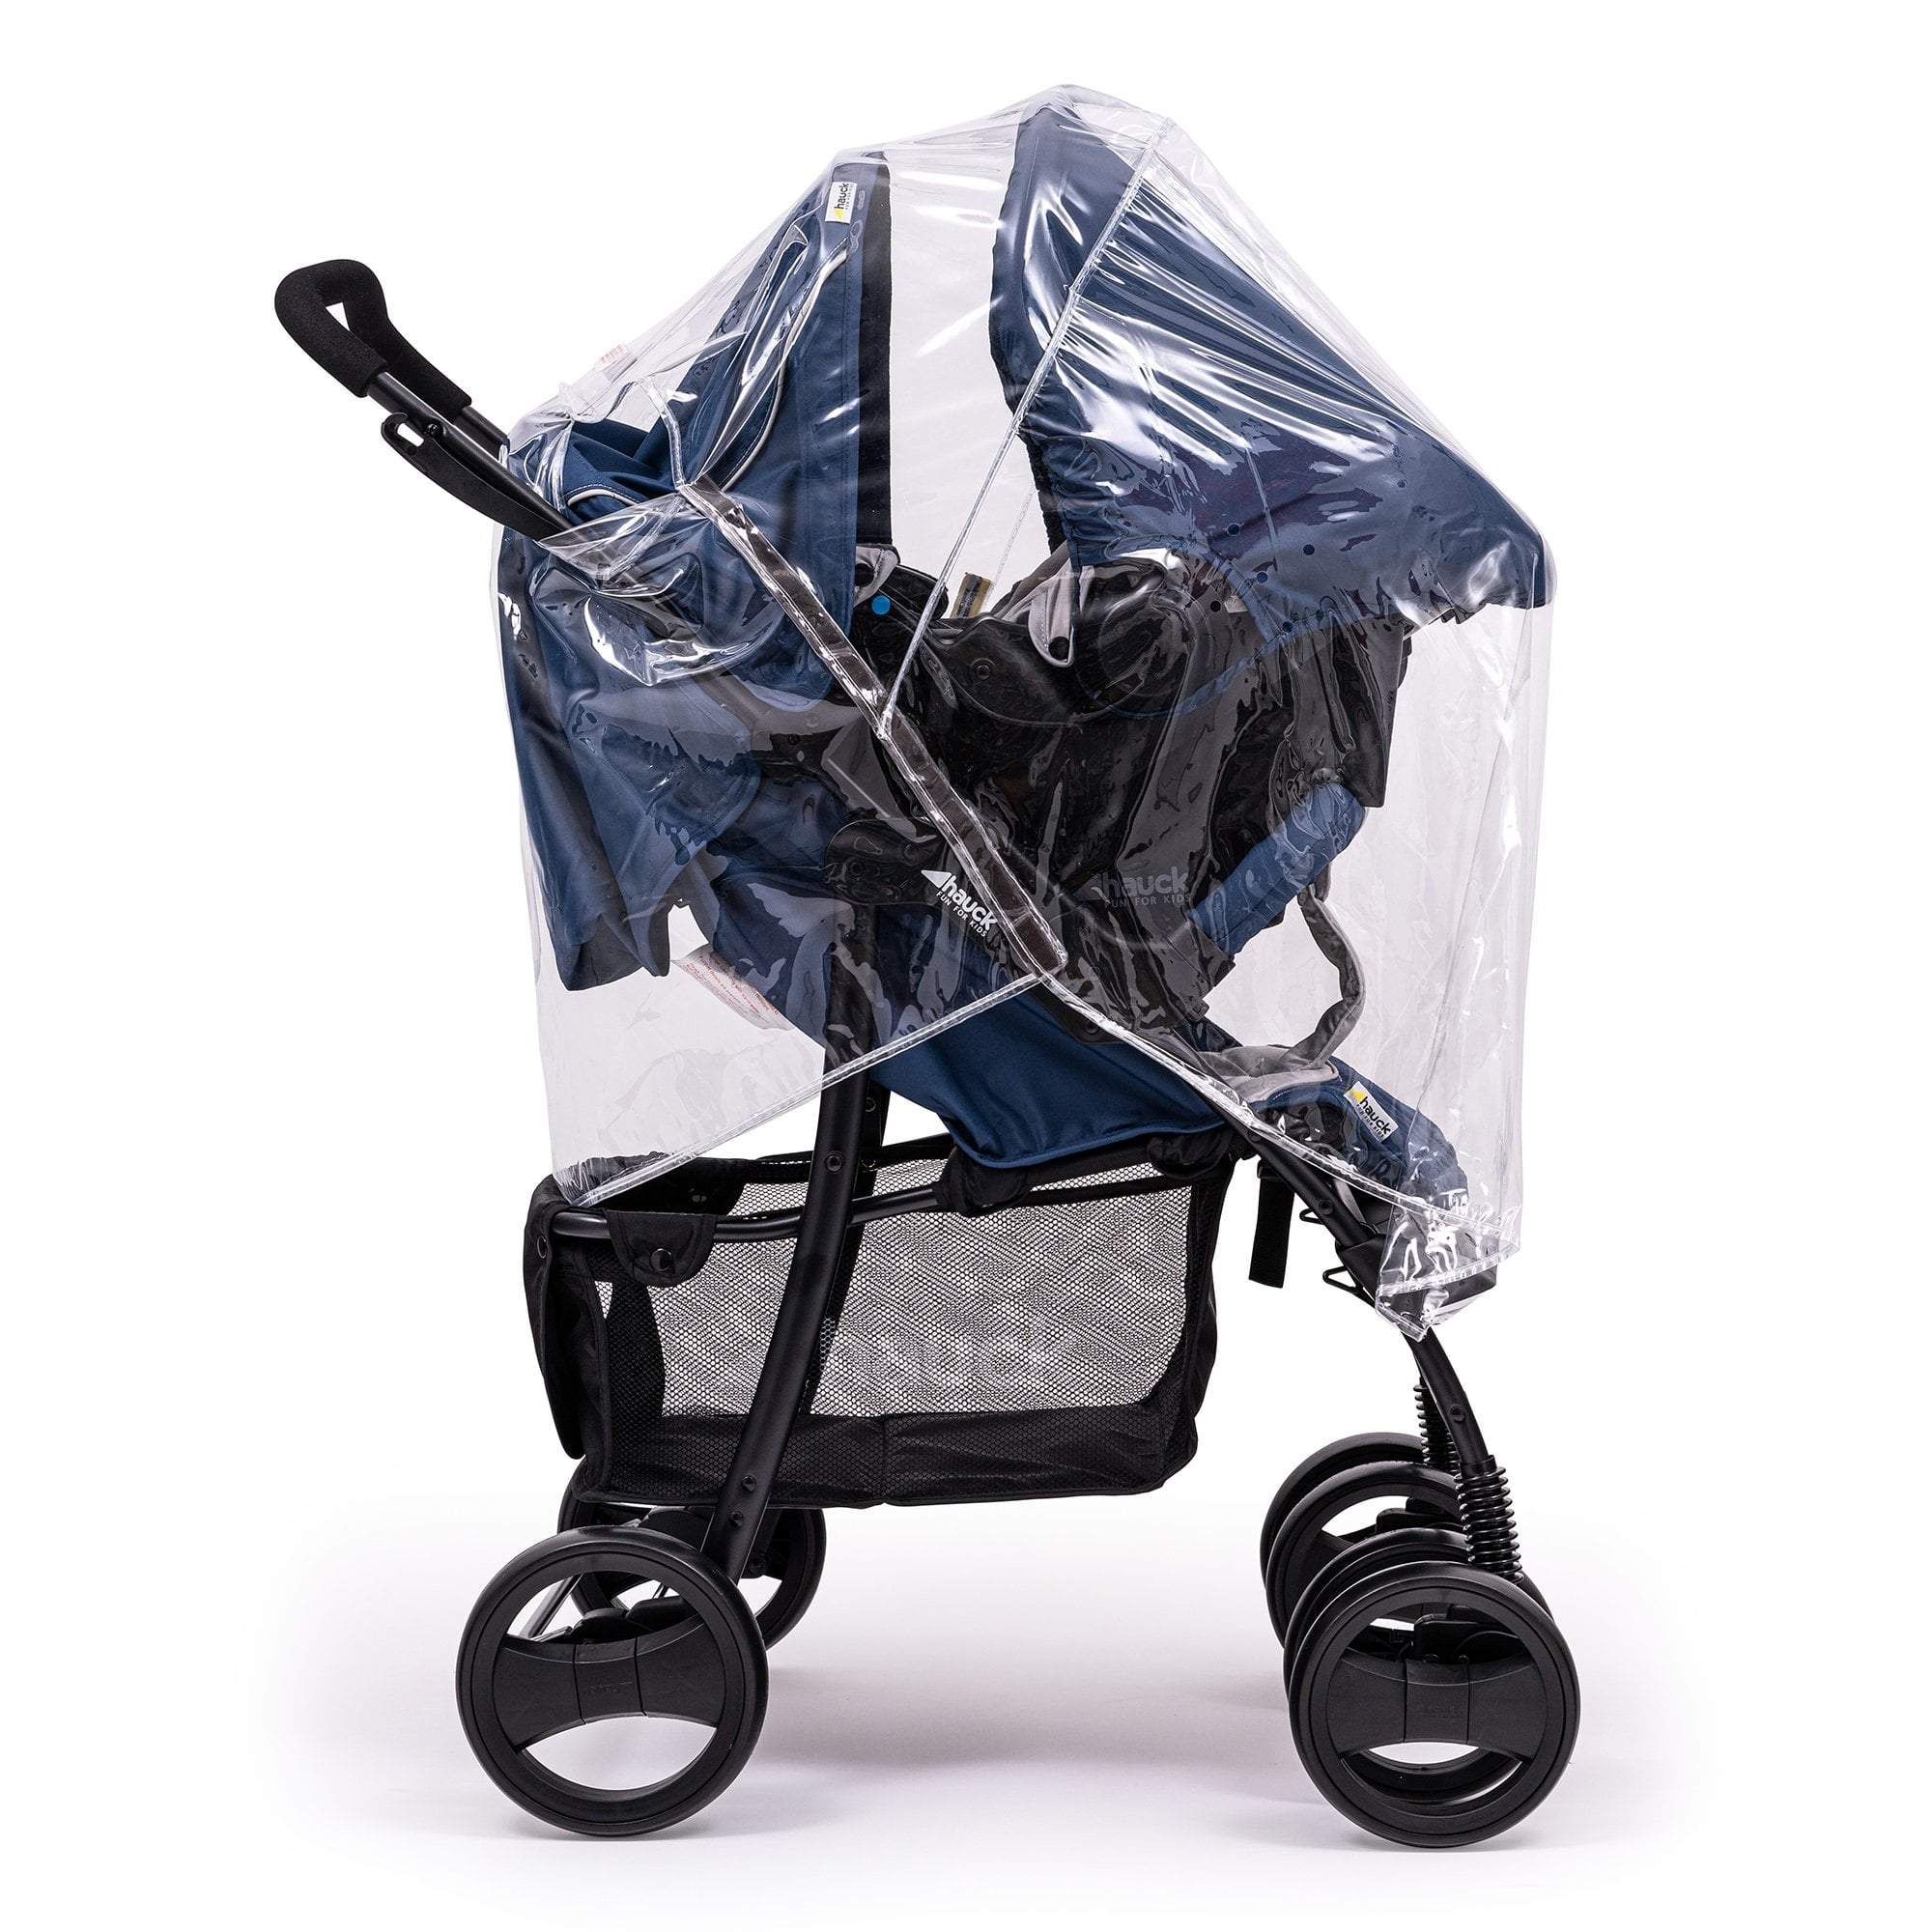 Travel System Raincover Compatible with Mutsy - Fits All Models - For Your Little One